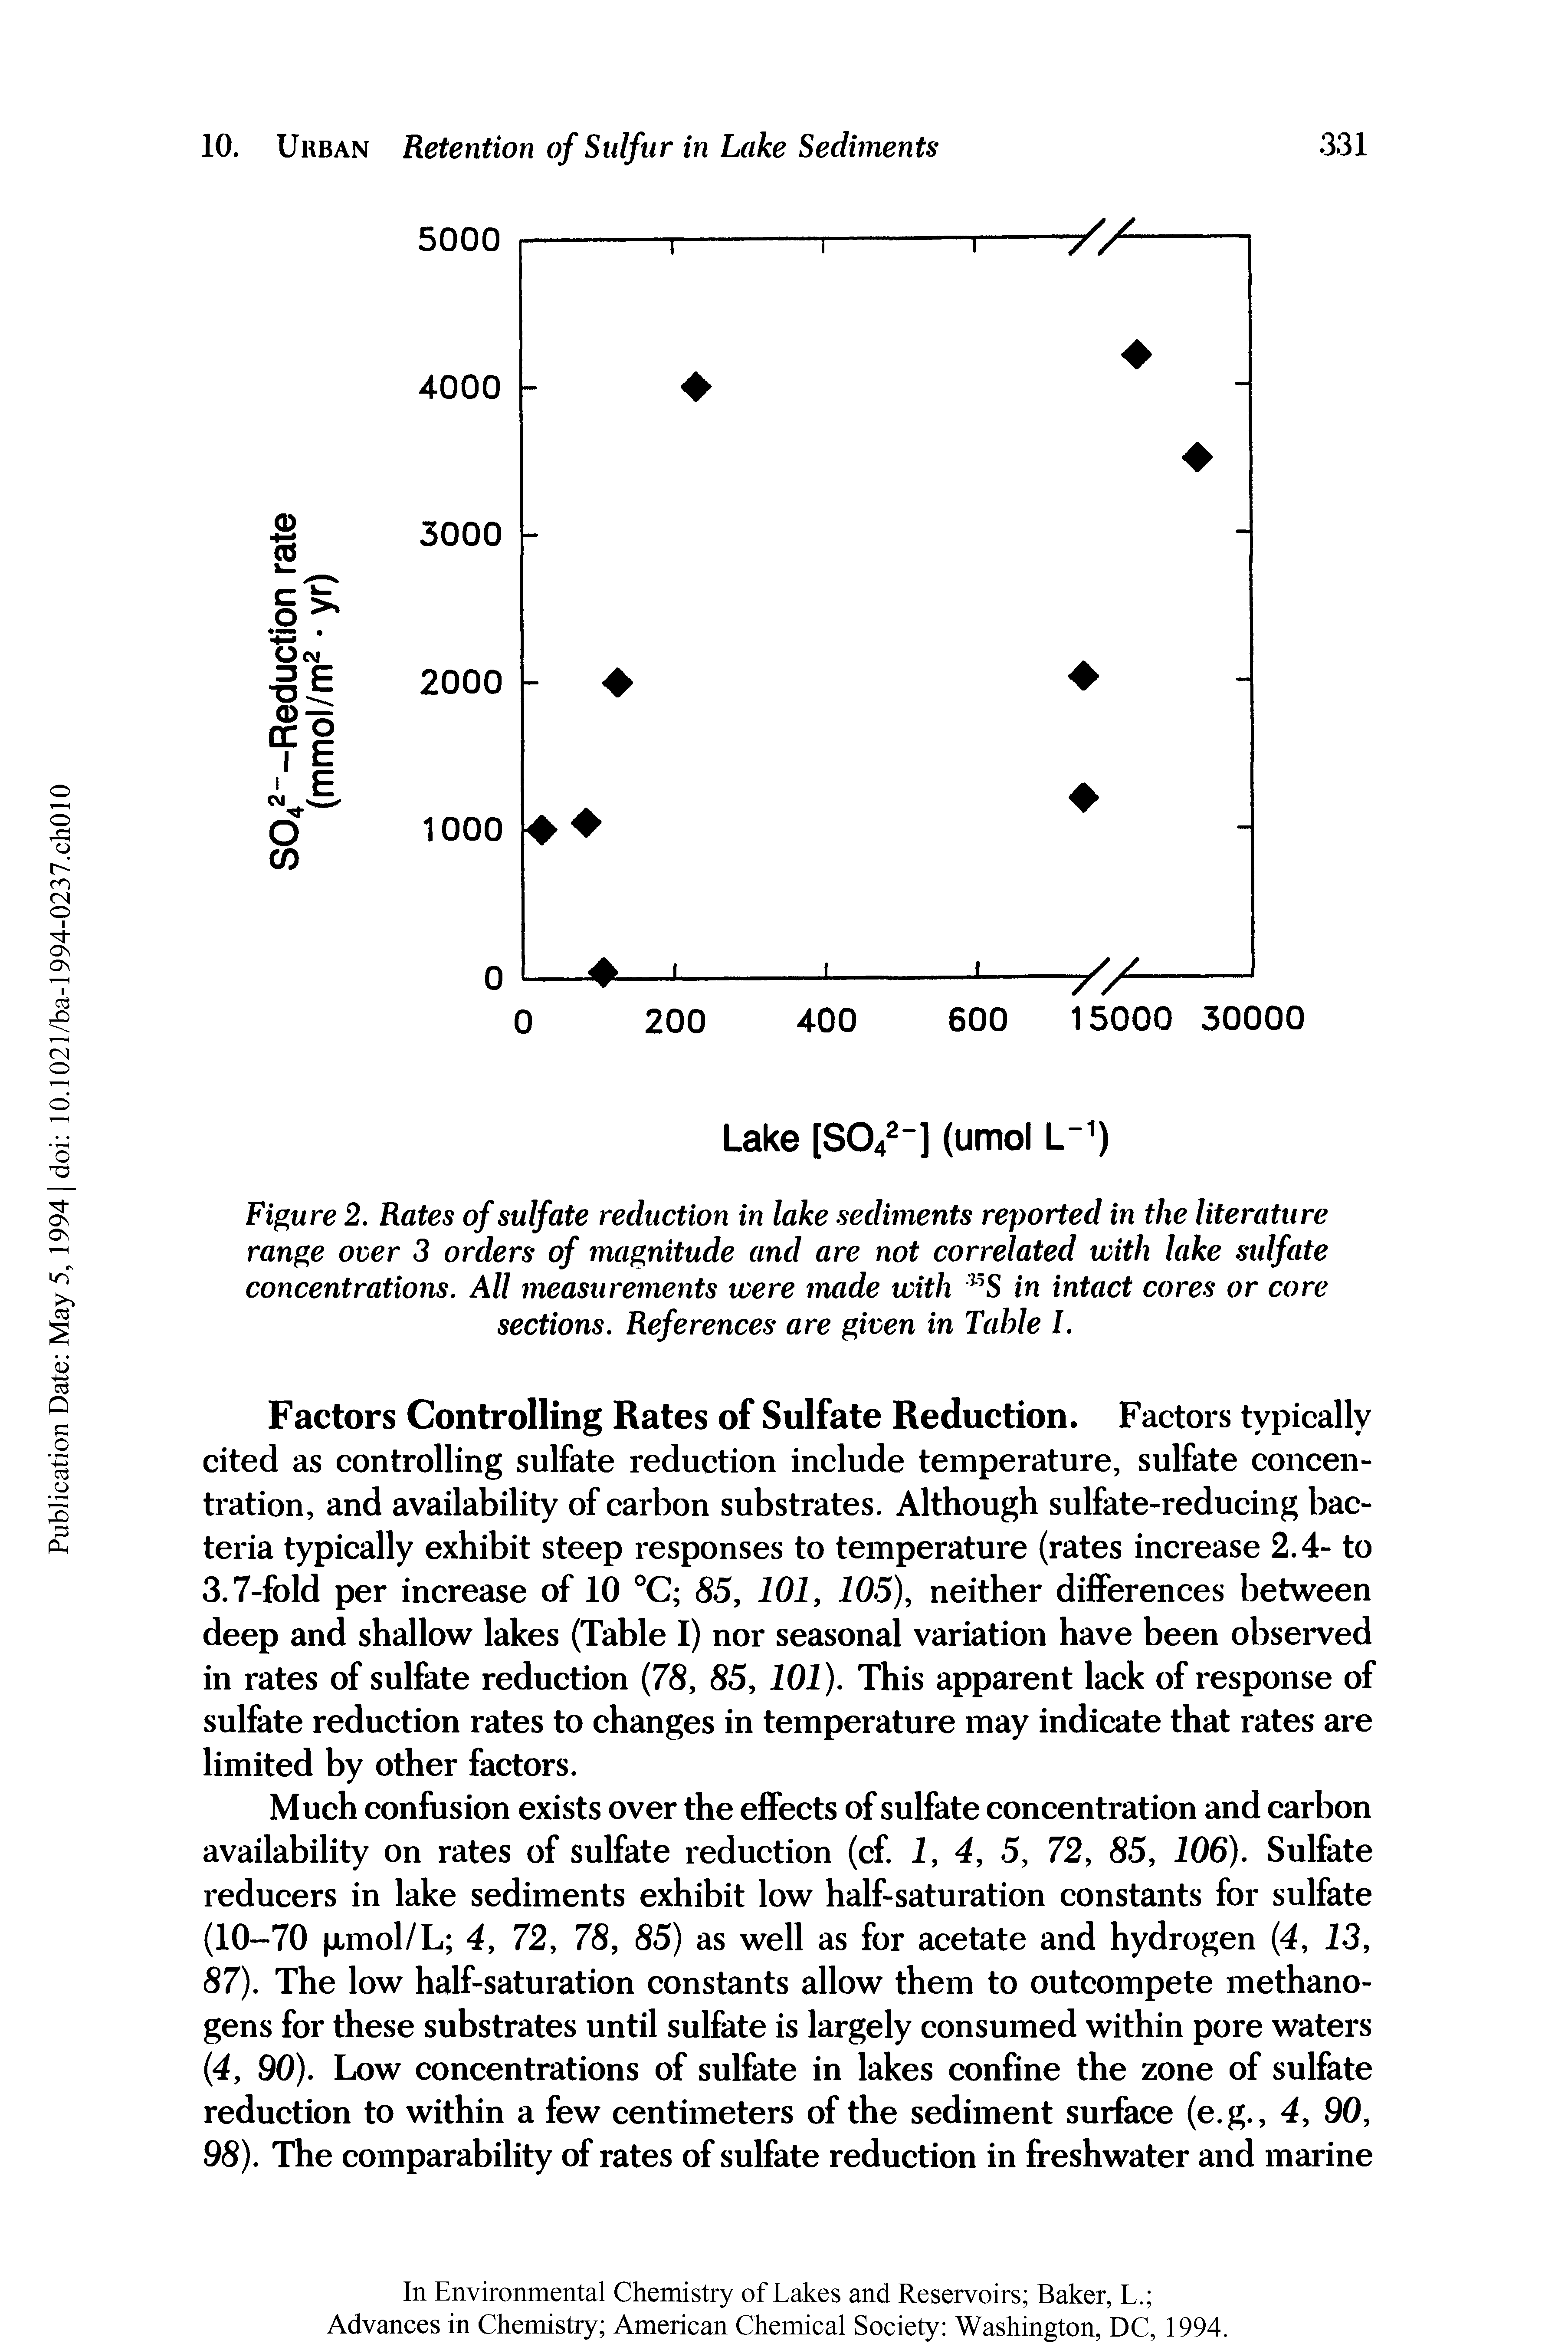 Figure 2. Rates of sulfate reduction in lake sediments reported in the literature range over 3 orders of magnitude and are not correlated with lake sulfate concentrations. All measurements were made with l5S in intact cores or core sections. References are given in Table I.